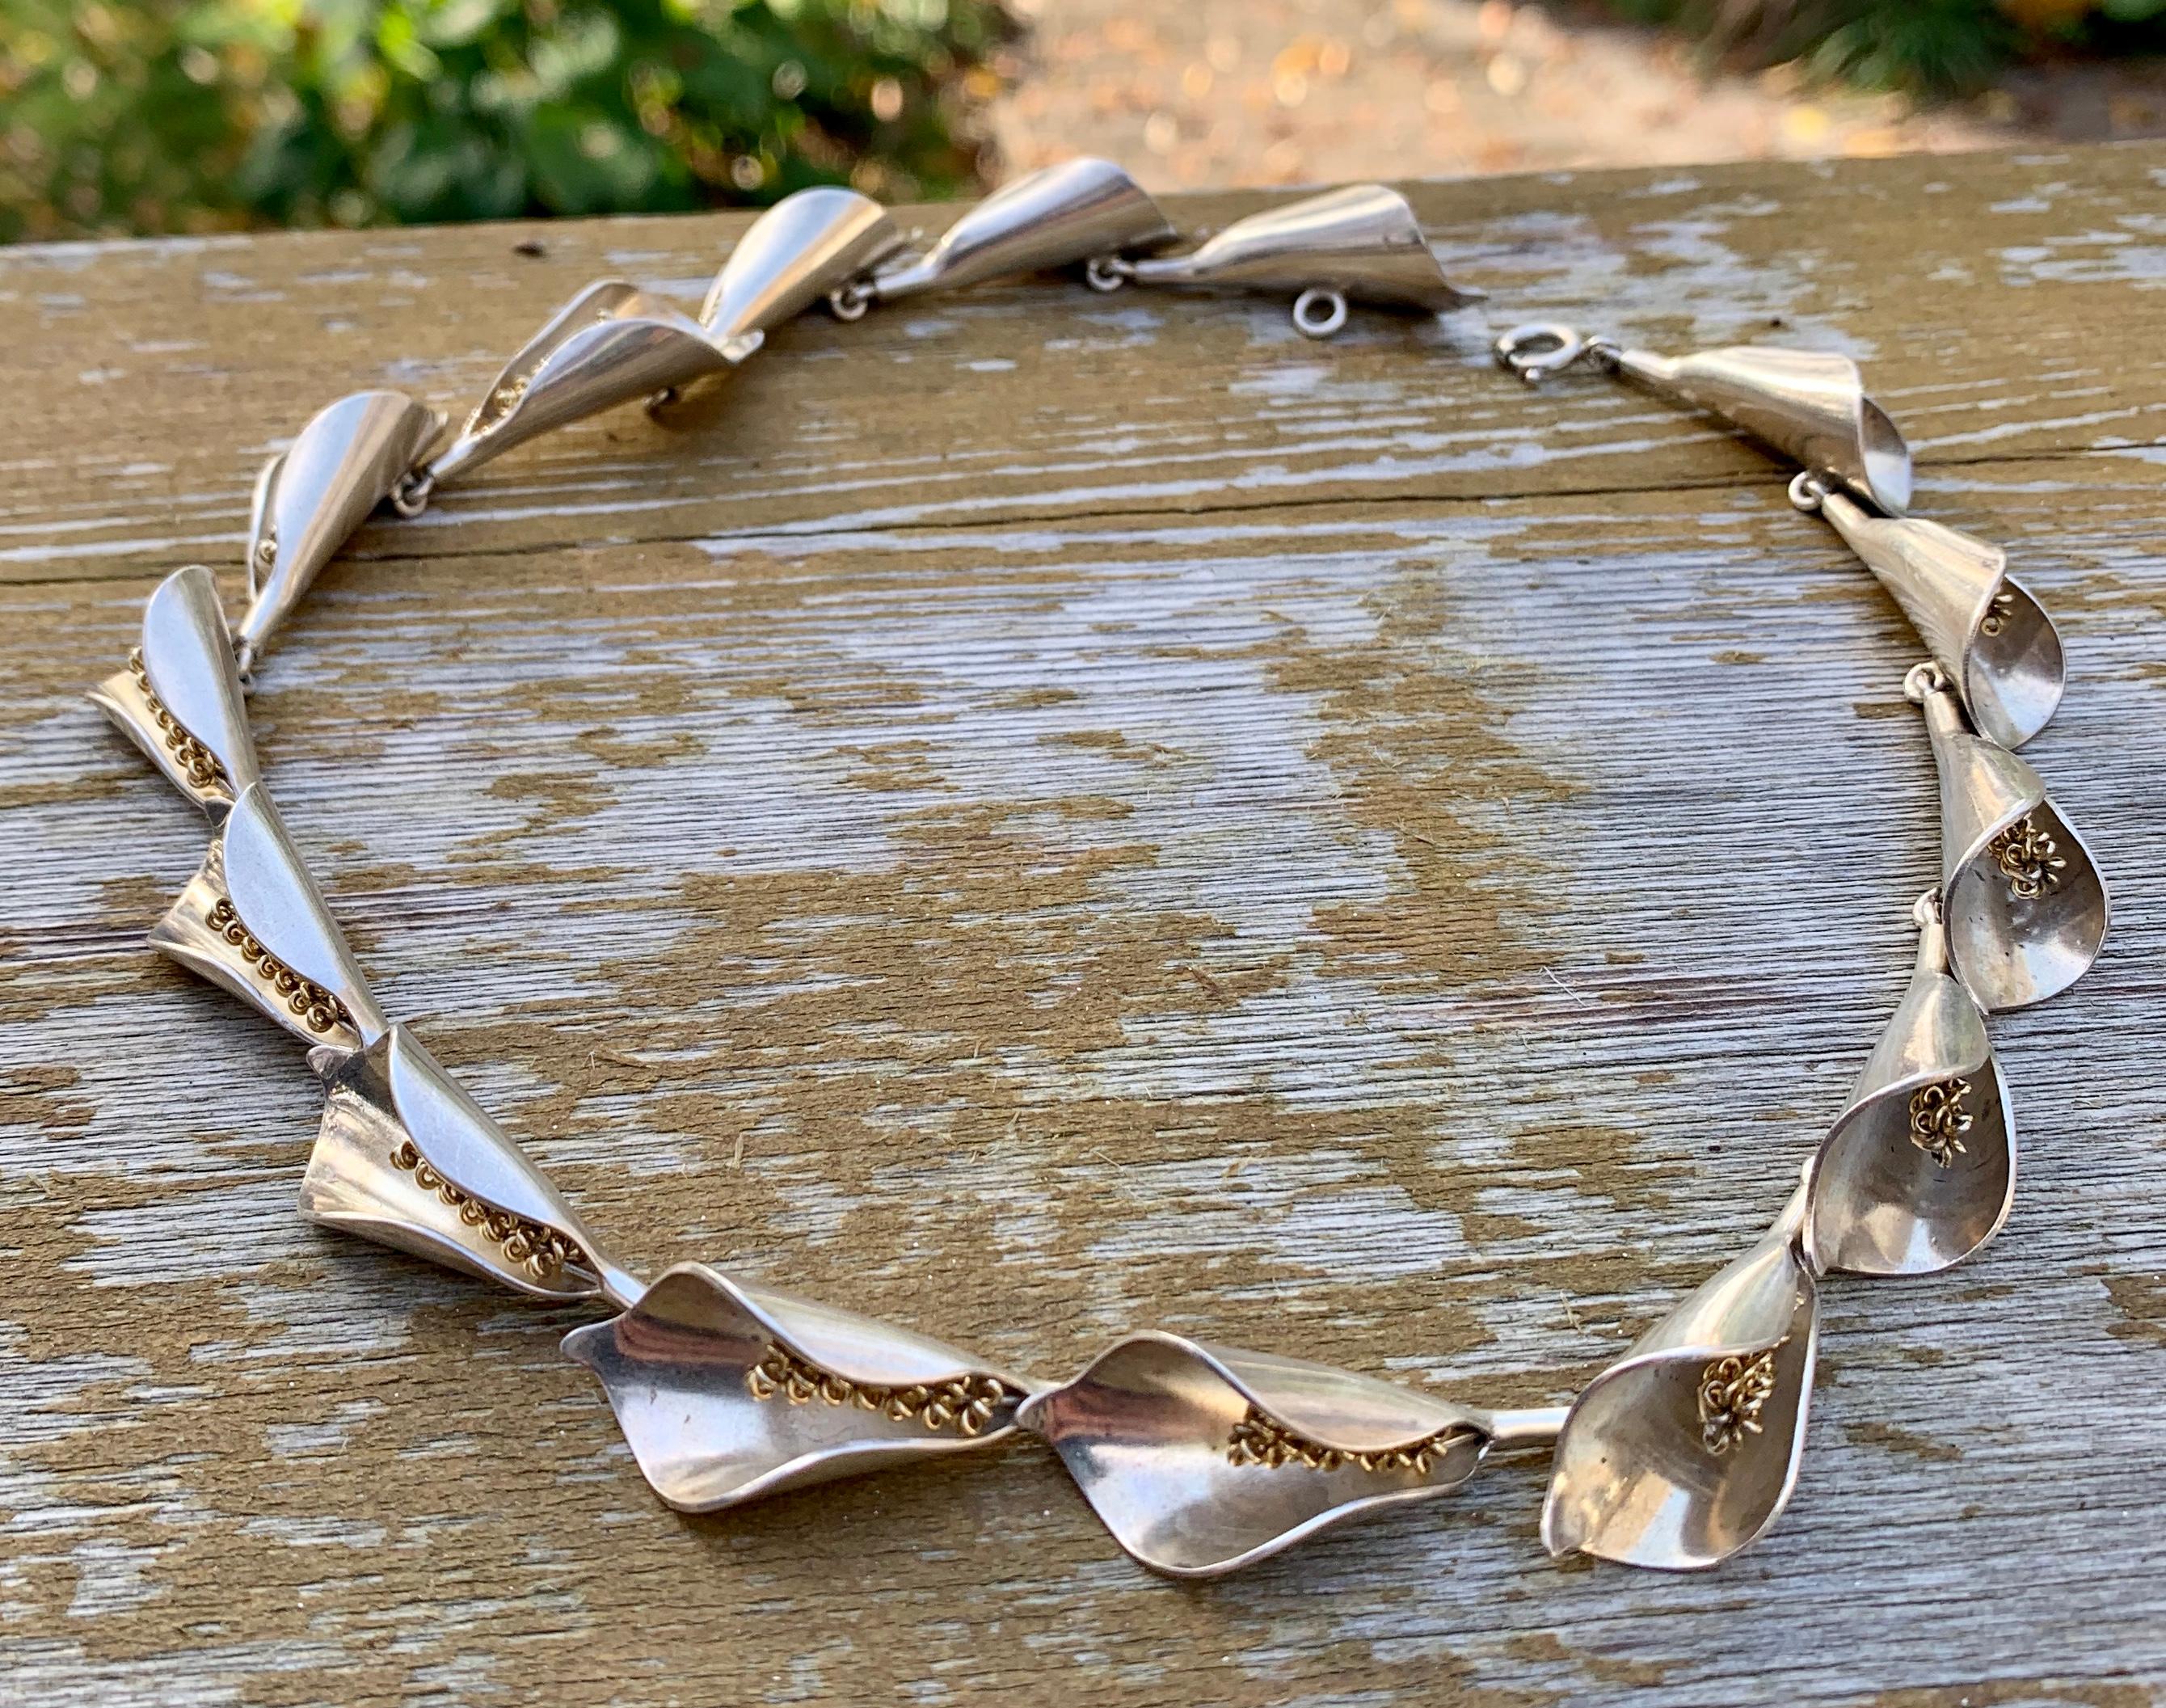 This is the classic Mid-Century Calla Lily Necklace in Sterling Silver made by Danish maker Anton Michelsen and designed by the famous artist Gertrude Engel (Rougie).   The design is a classic of modernism.  It has a wonderful organic feel.  Each